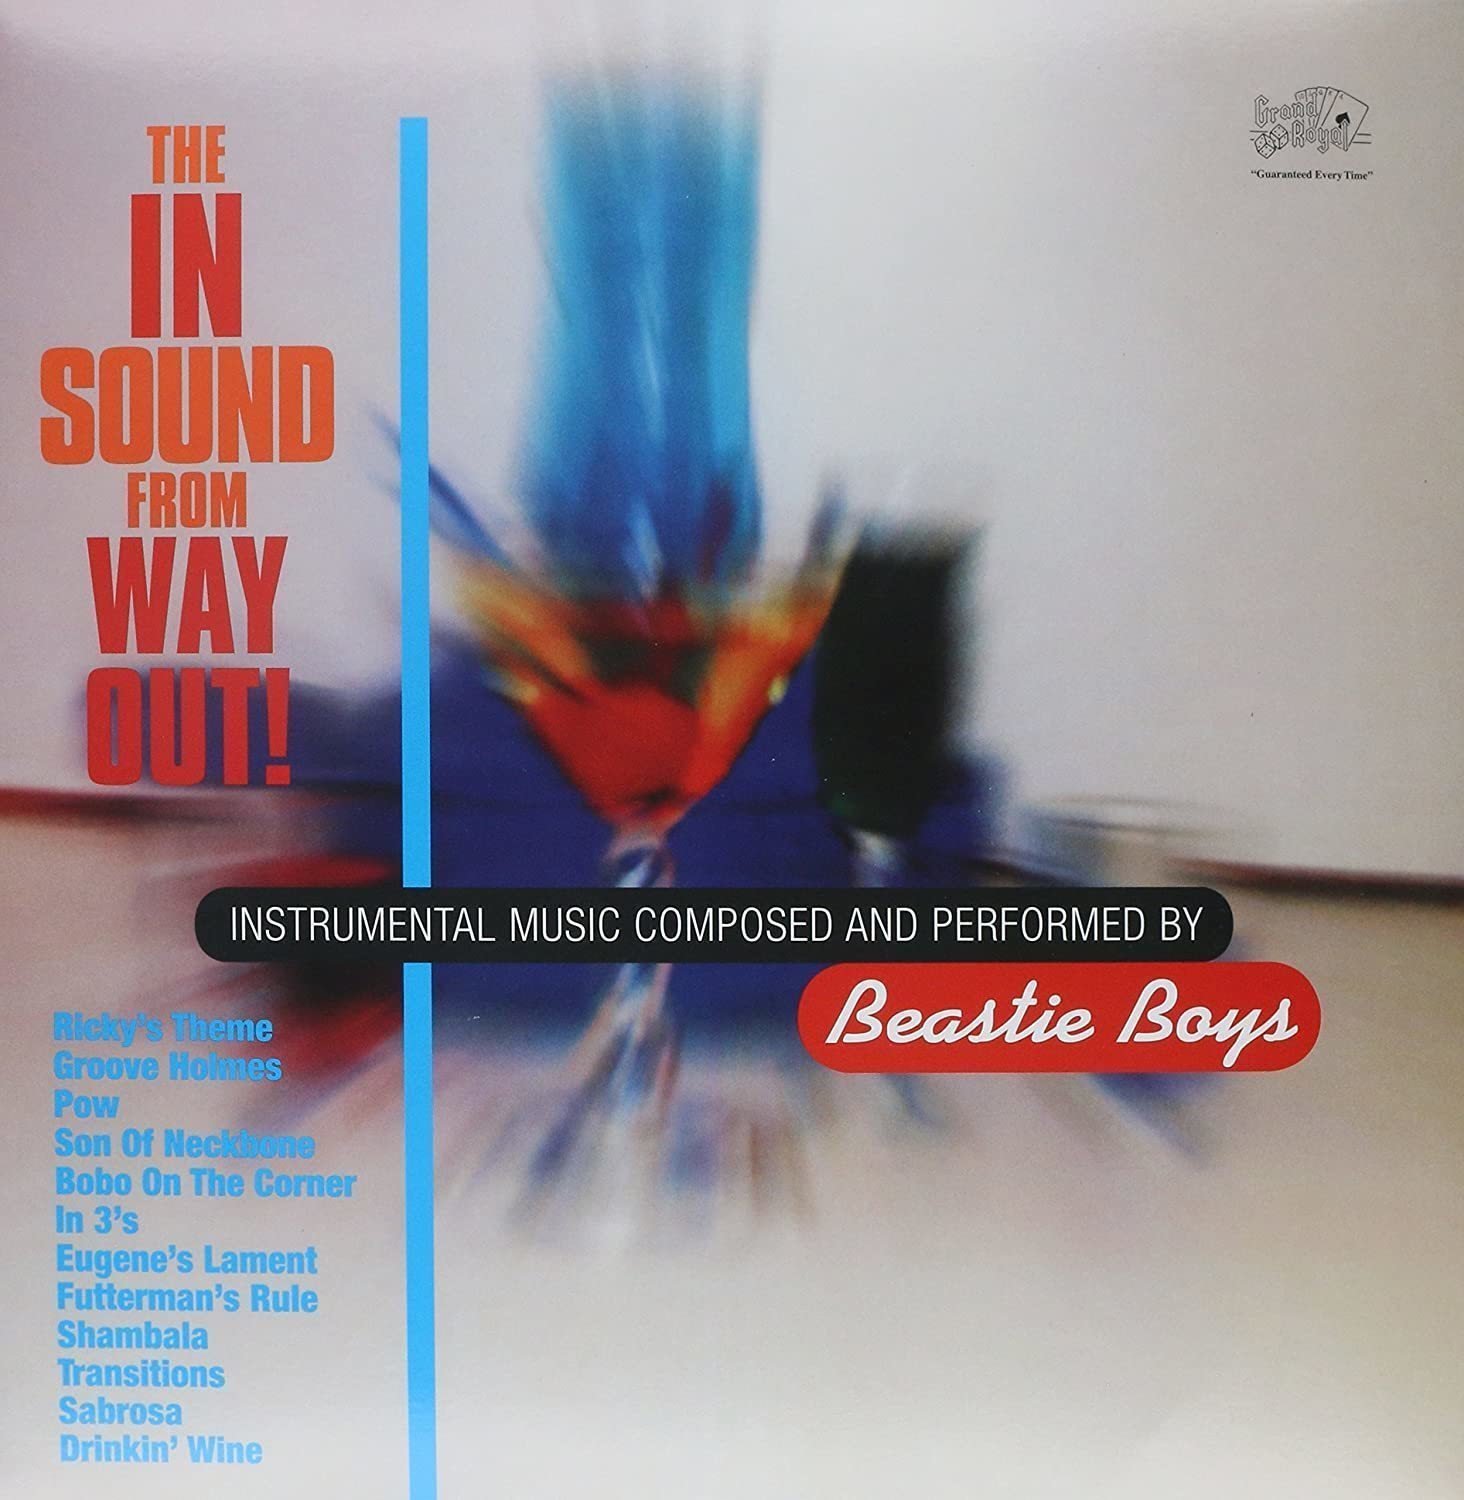 Disco de vinil Beastie Boys - The In Sound From Way Out (LP)